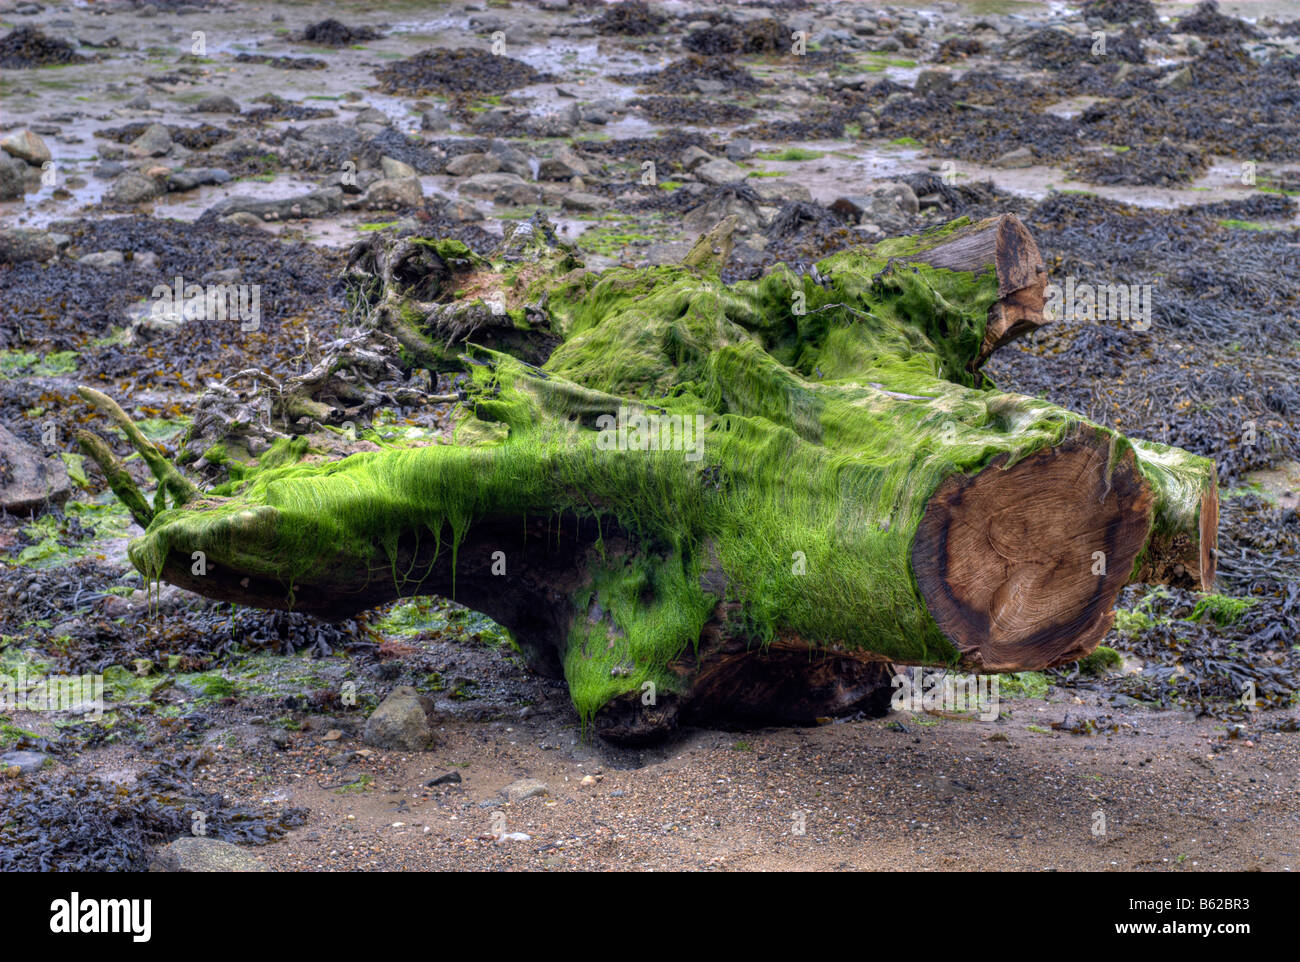 Green algae covering part of a tree stump, Brittany, France, Europe Stock Photo